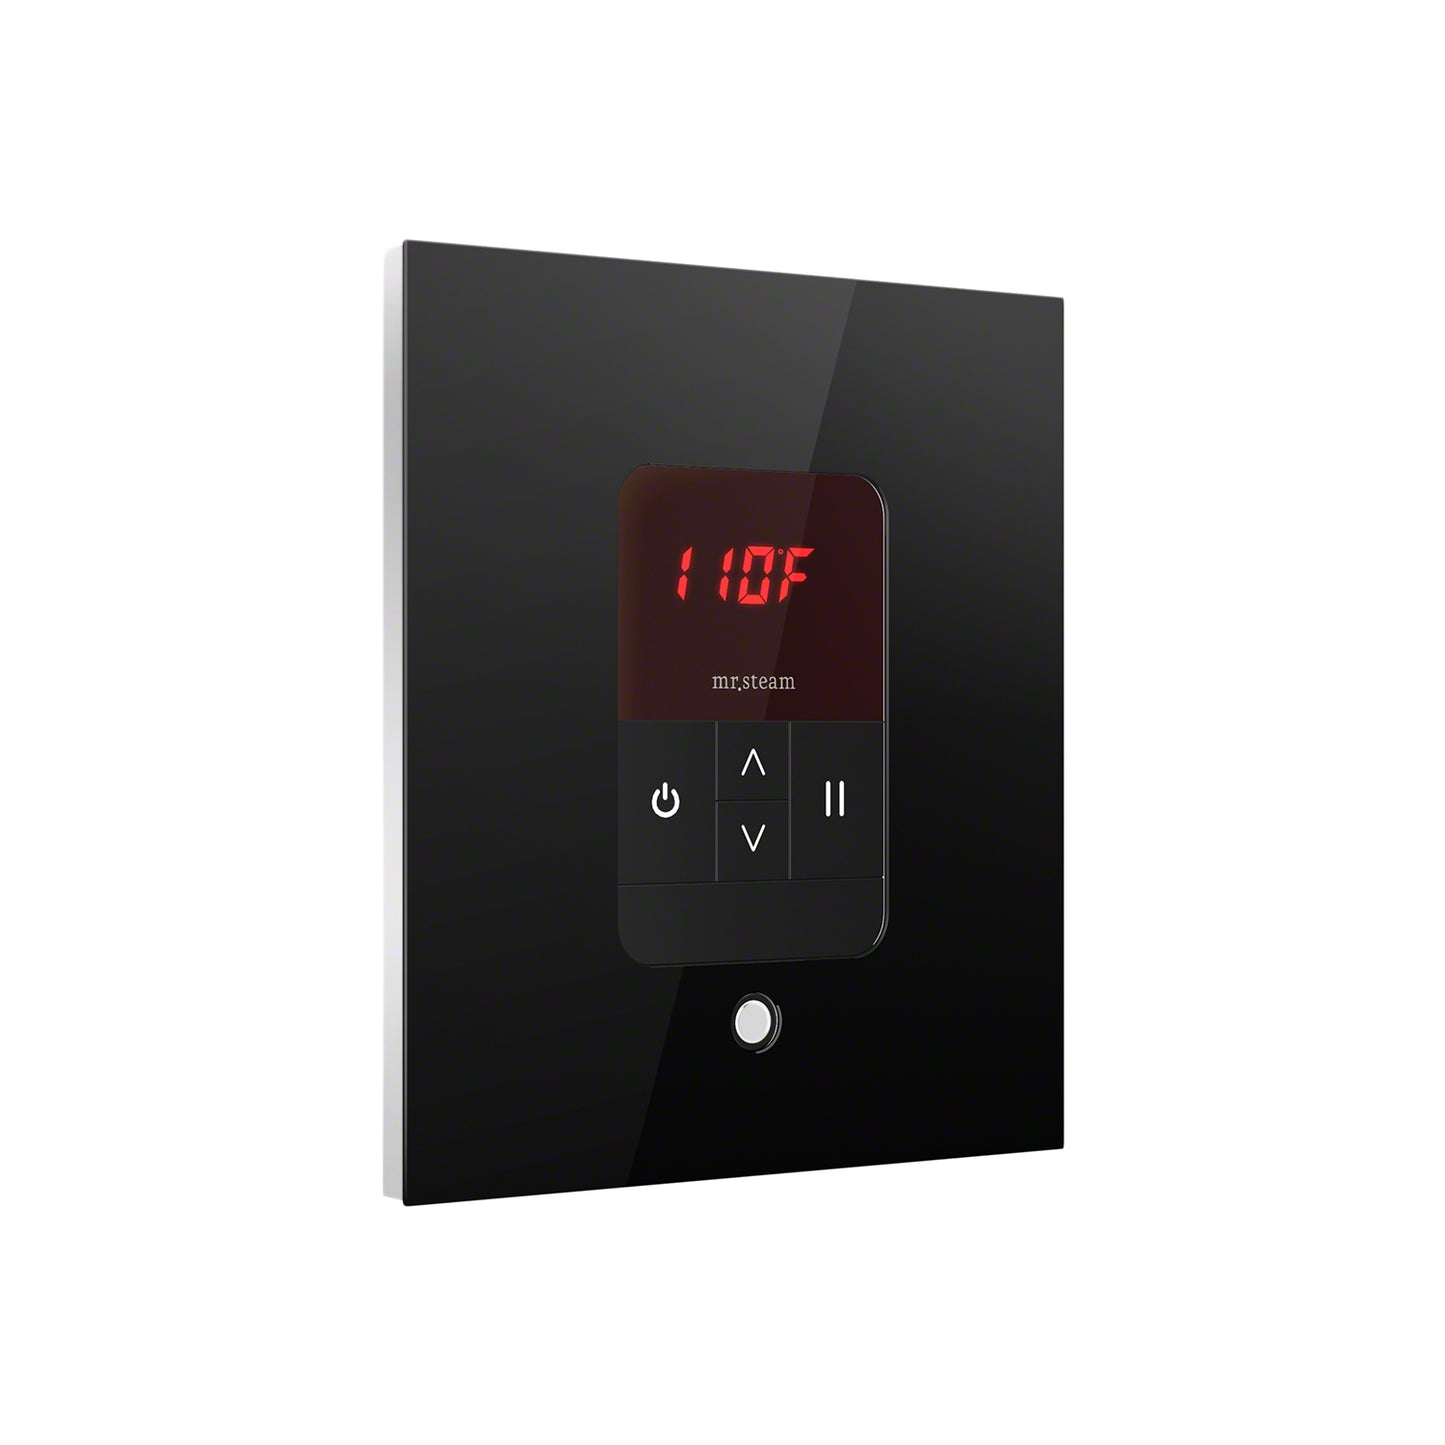 iTempo Square Steam Shower Control in Black with Polished Chrome Bezel